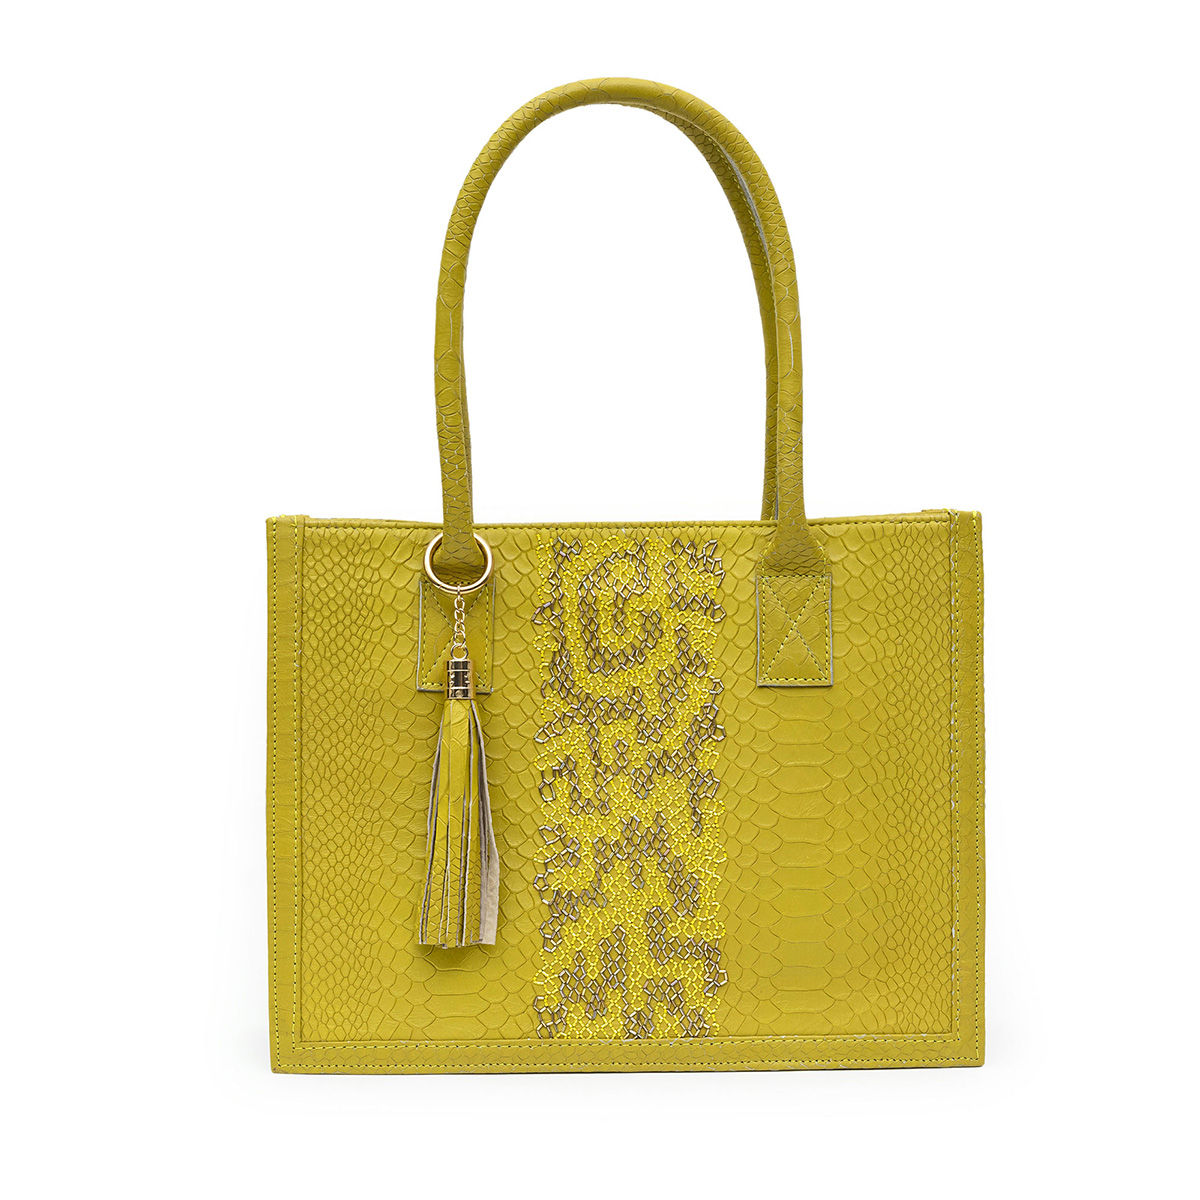 Buy Mustard Yellow Purse Online In India - Etsy India